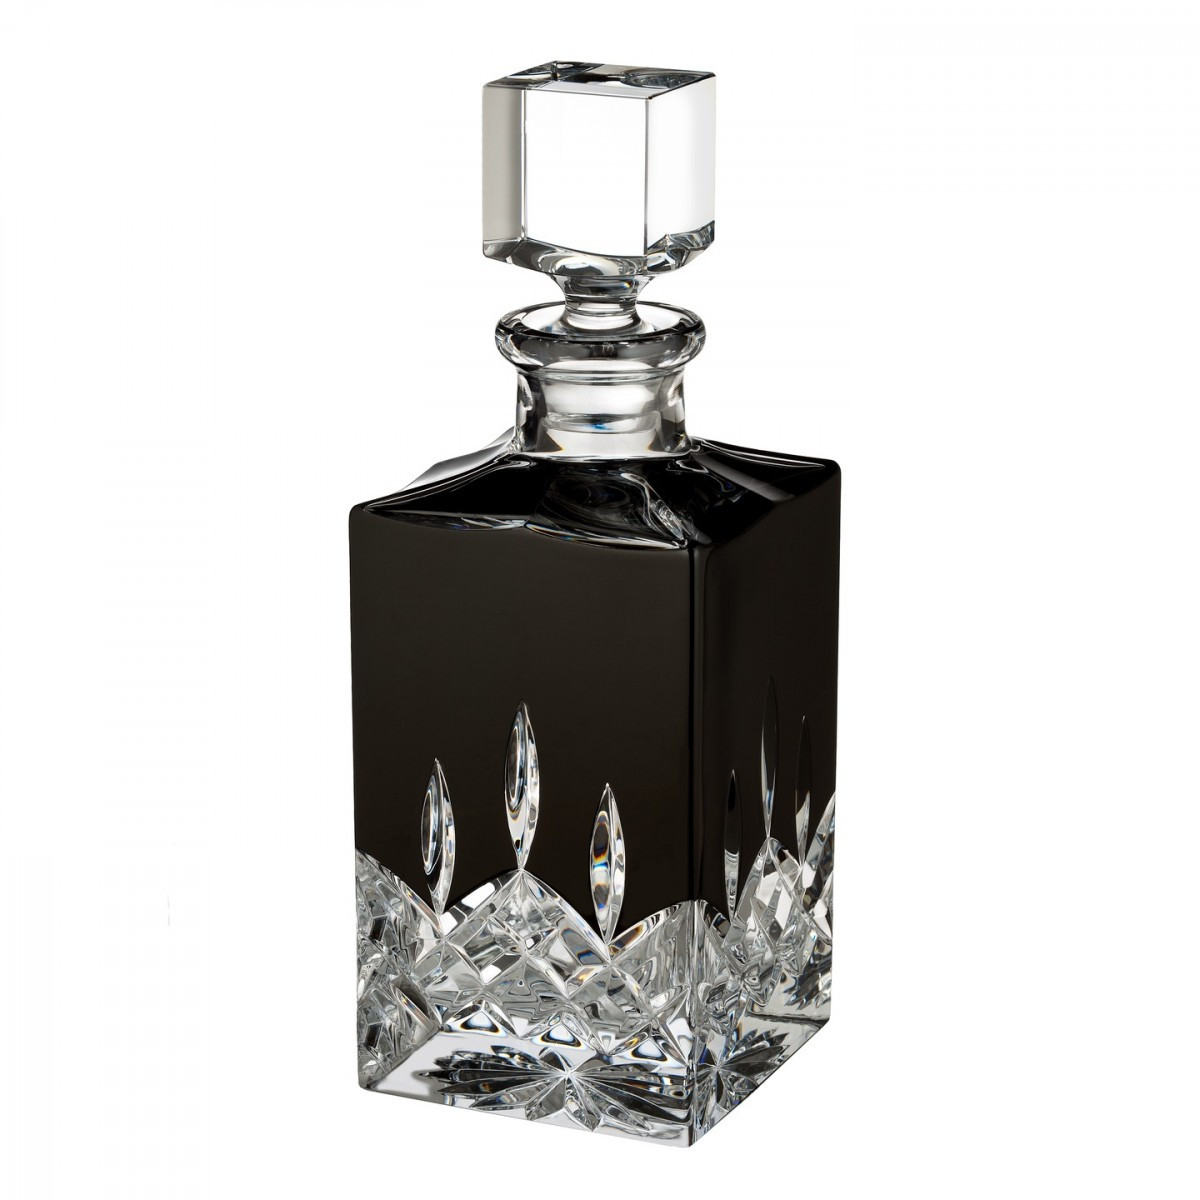 waterford lismore vase 8 of lismore black square decanter waterford us intended for lismore black square decanter